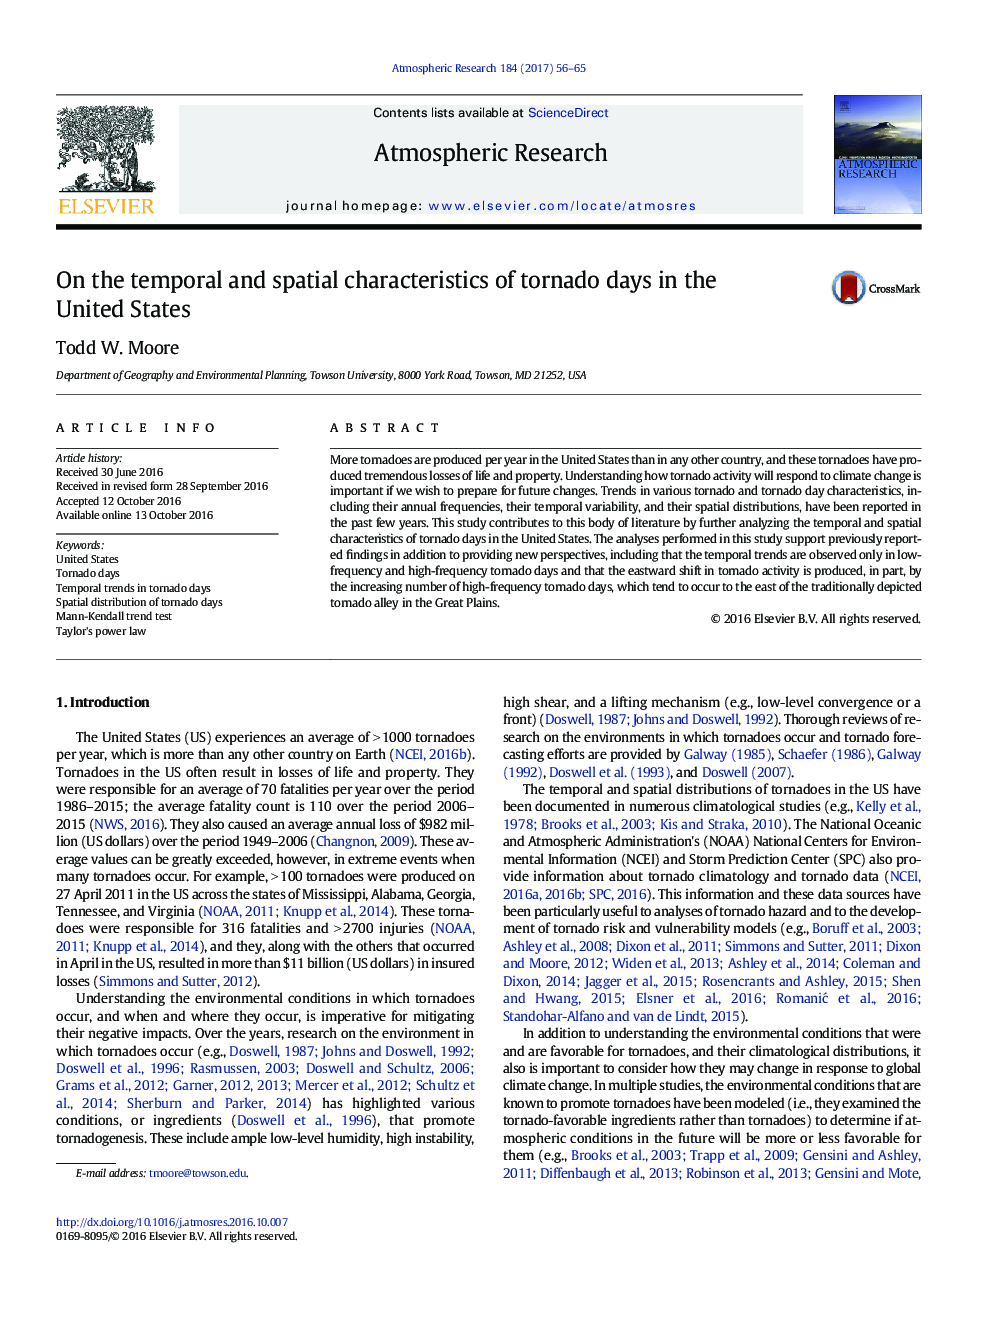 On the temporal and spatial characteristics of tornado days in the United States